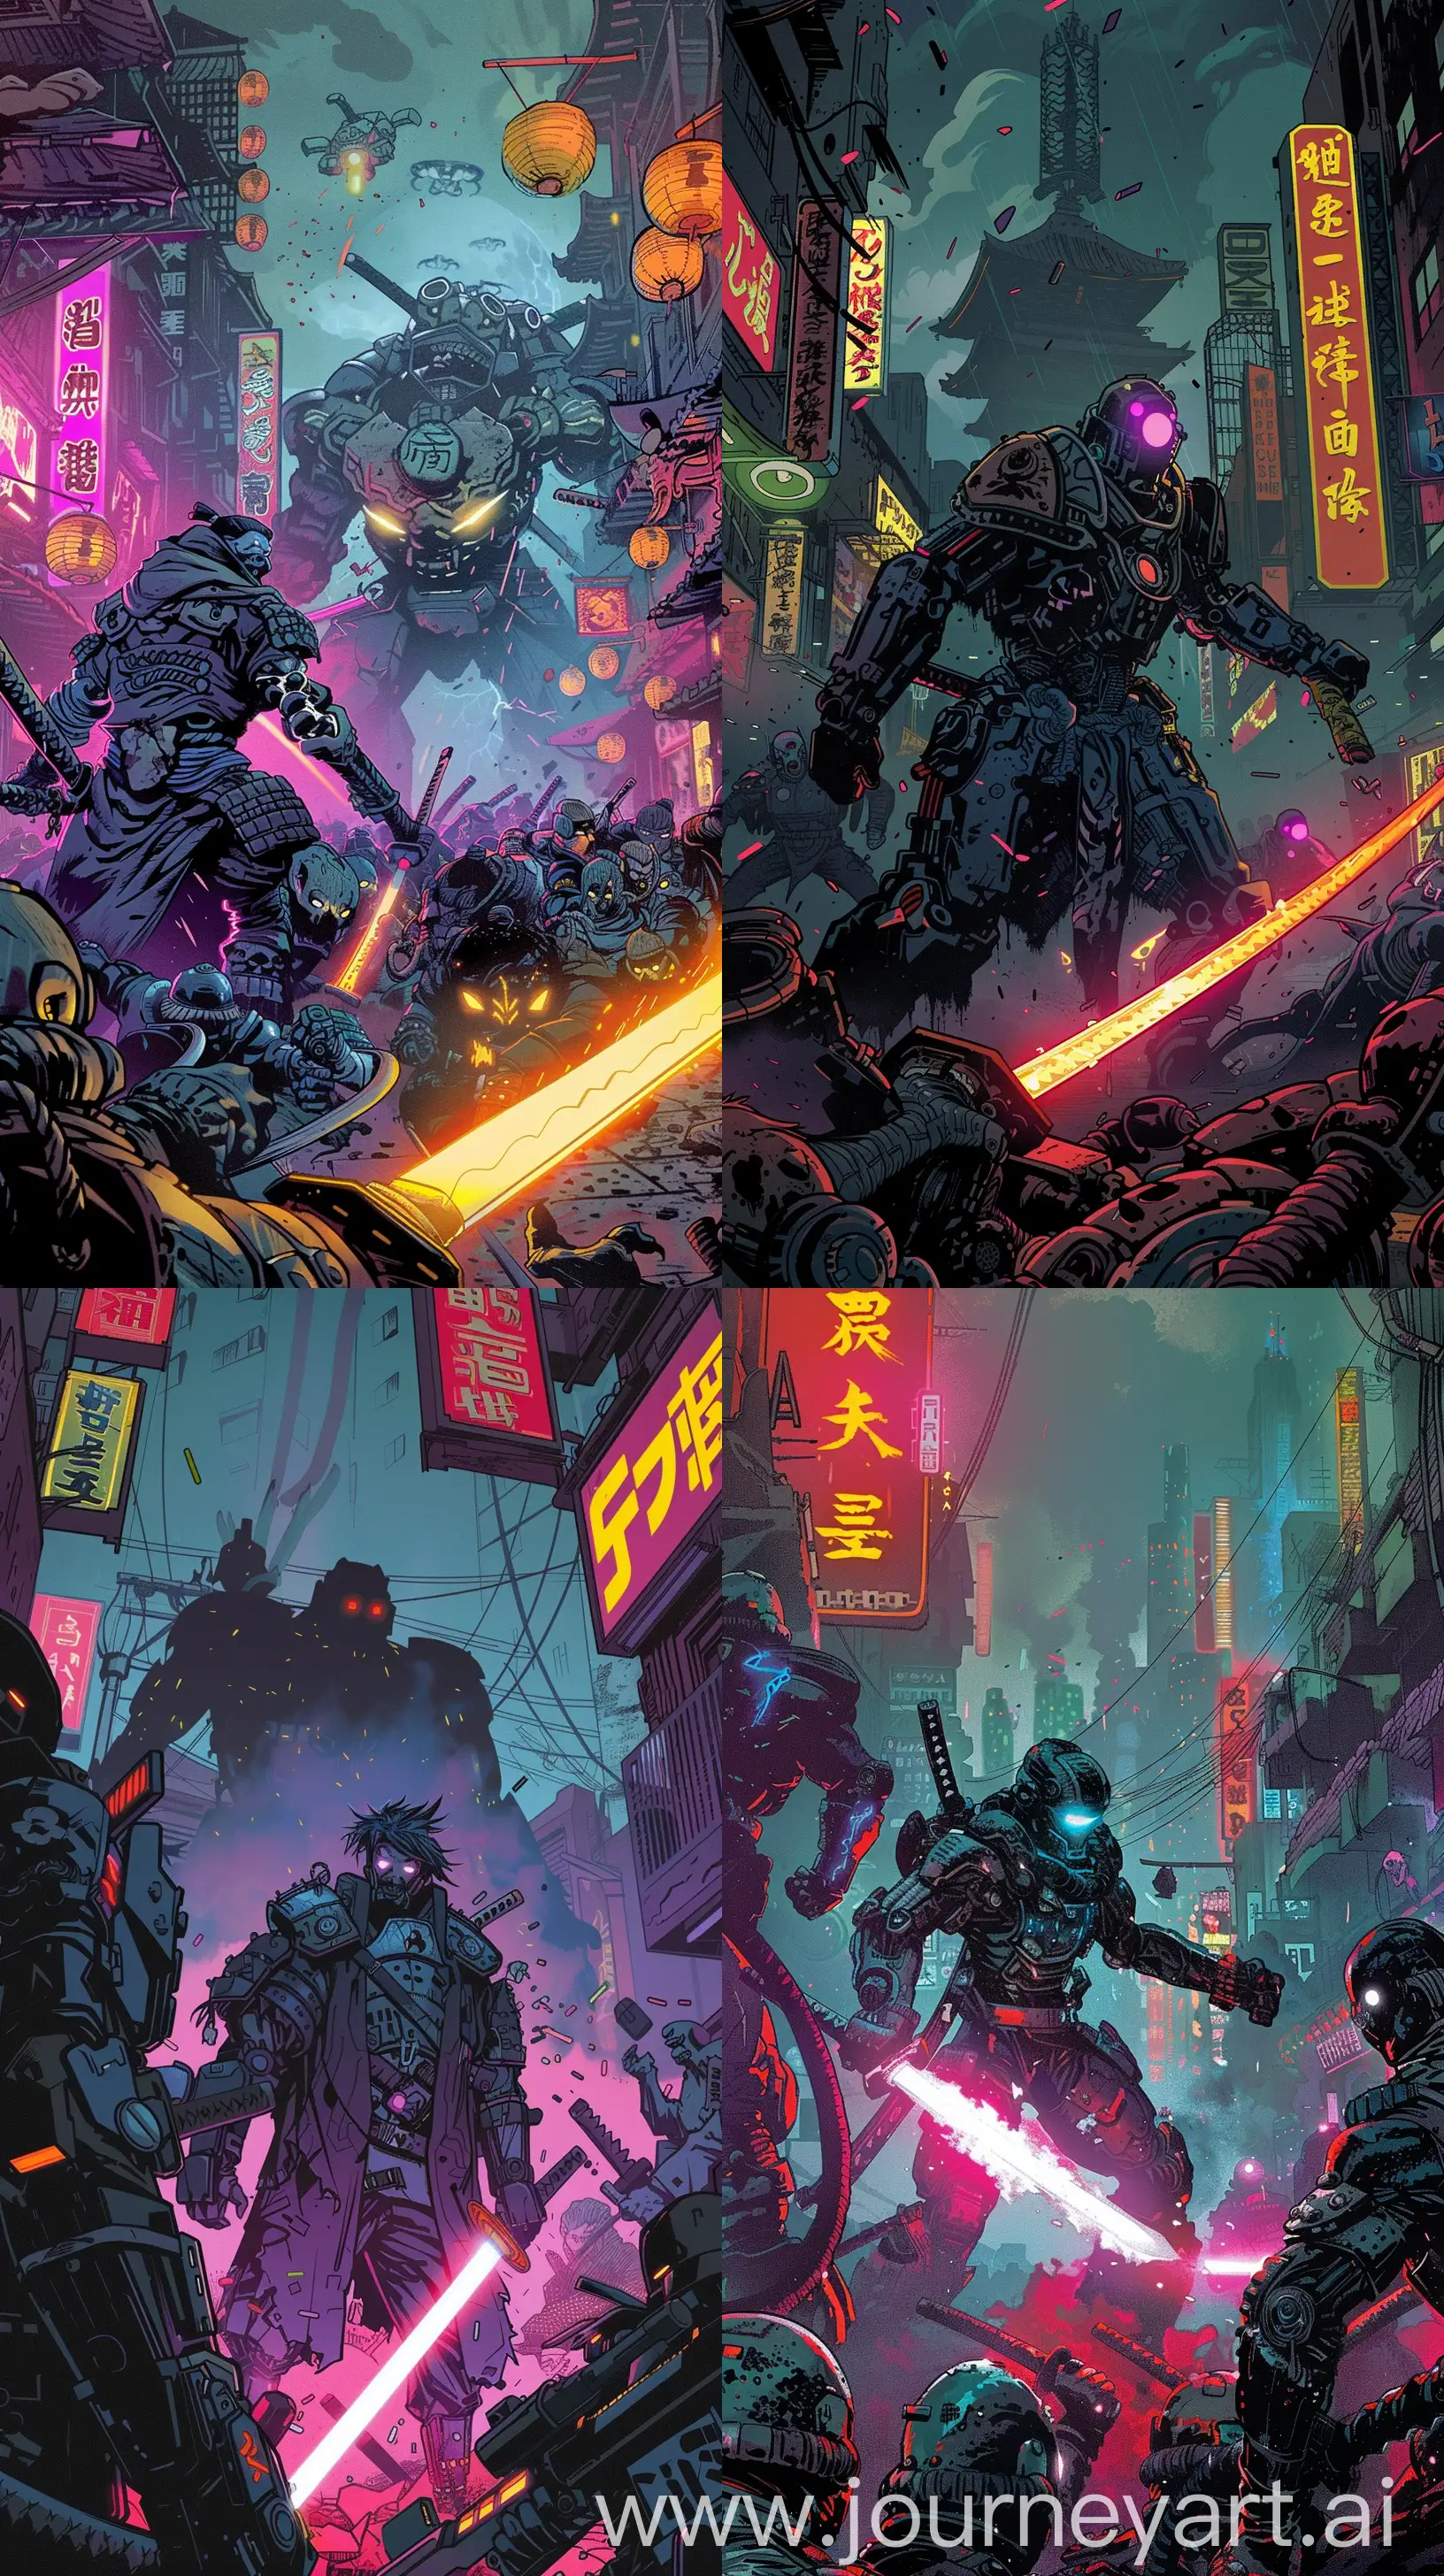 Create an intense scene of a cybernetic samurai standing off against a horde of futuristic ninjas in a neon-lit, dystopian city. Employ Mignola's art style with its strong use of black and strategic use of color to highlight the samurai's glowing sword and the ninjas' cyber-enhancements. The composition should be simple but dynamic, evoking a sense of imminent action phone wallpaper --ar 9:16